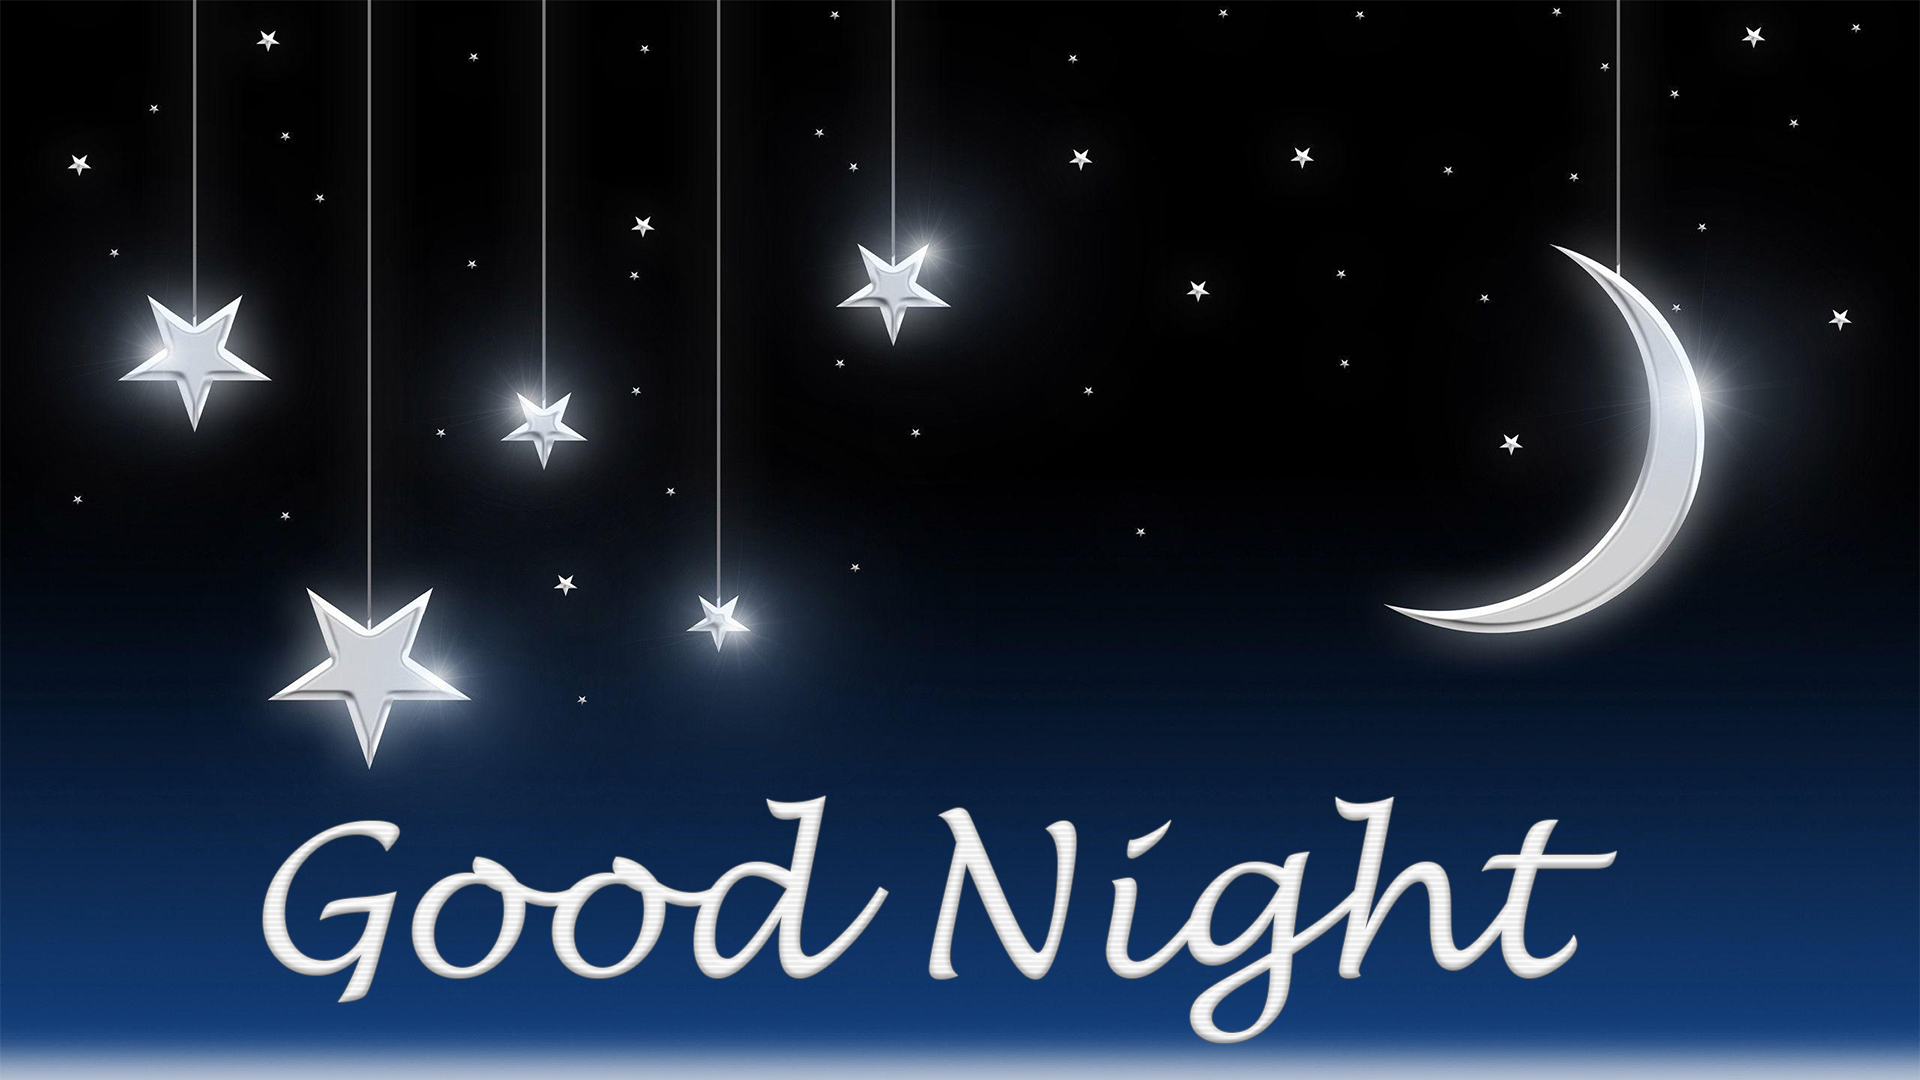 Sweet Good Night Images & Pictures Free Download